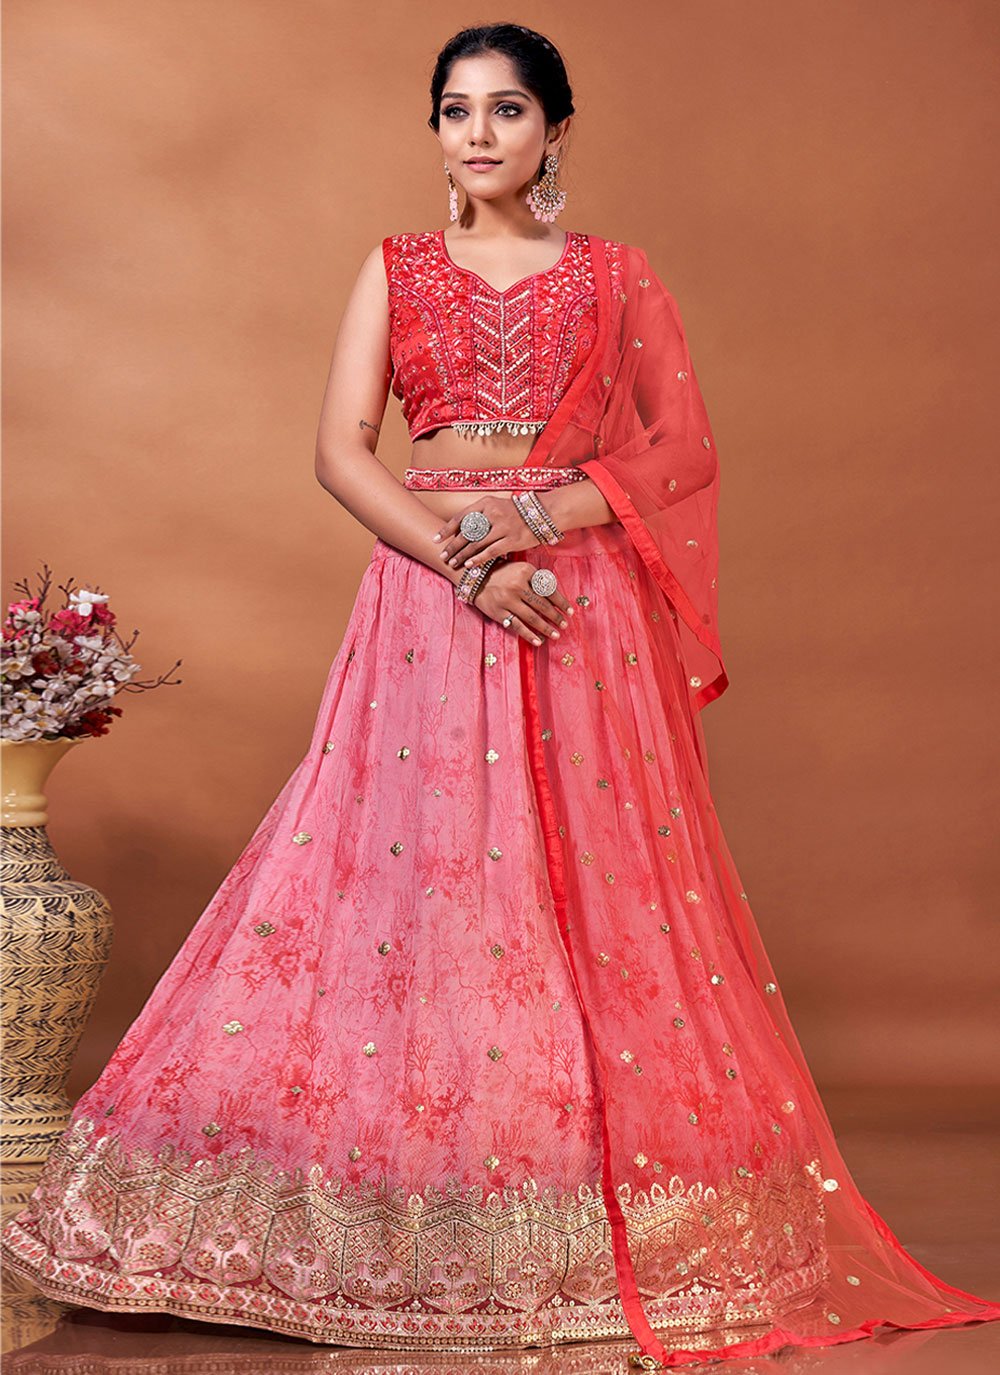 Buy Lehenga Online Up To 50% Off. Free Shipping From USA. – tagged 